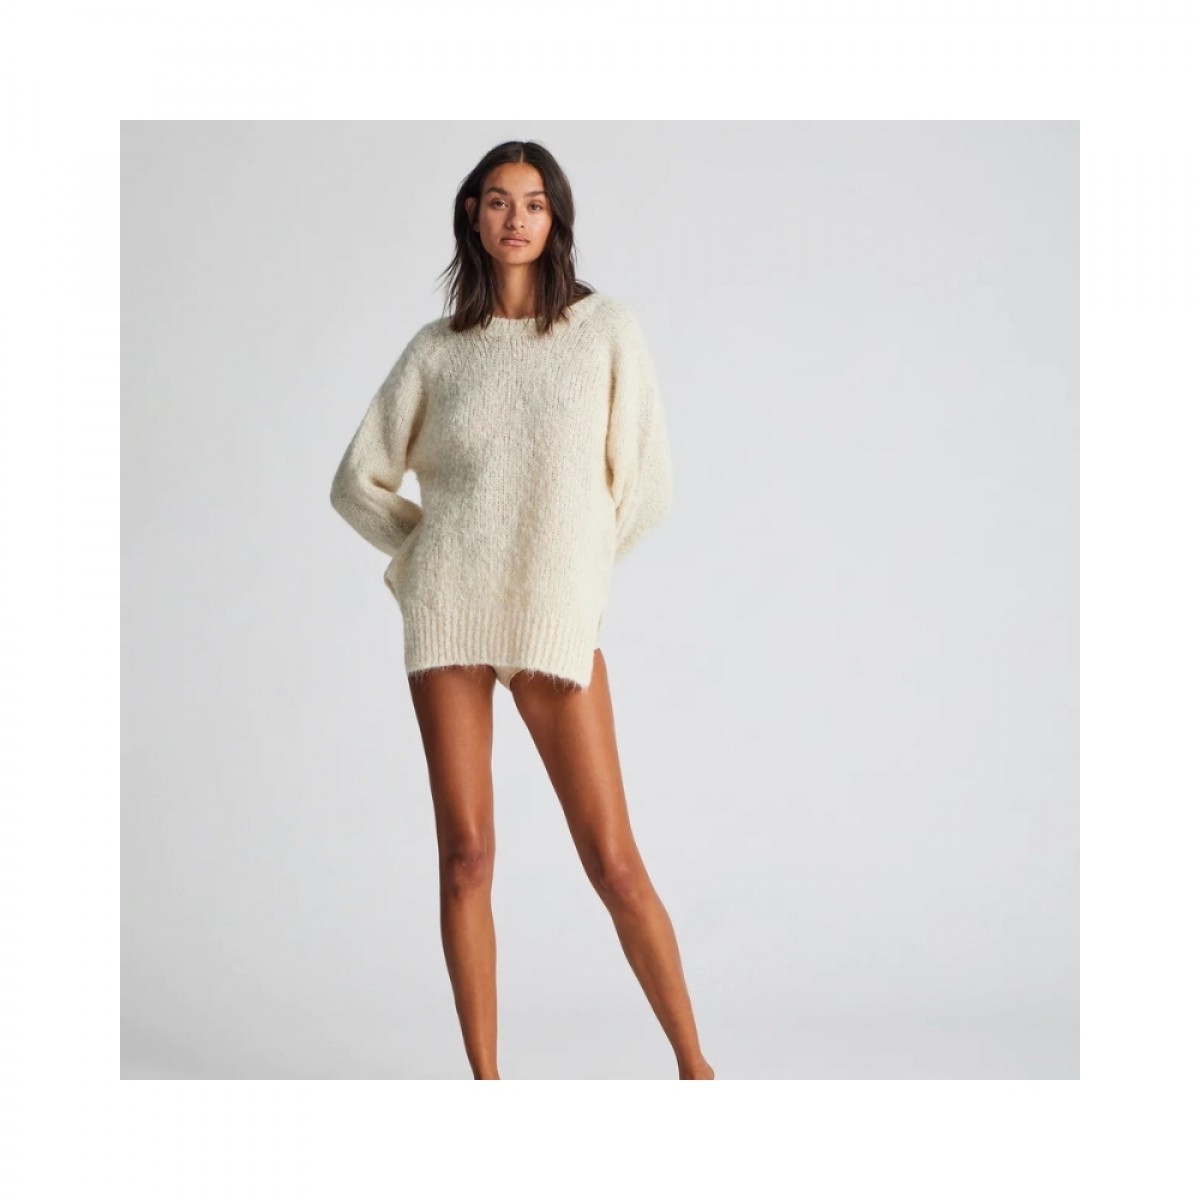 sille knit - off white - model front